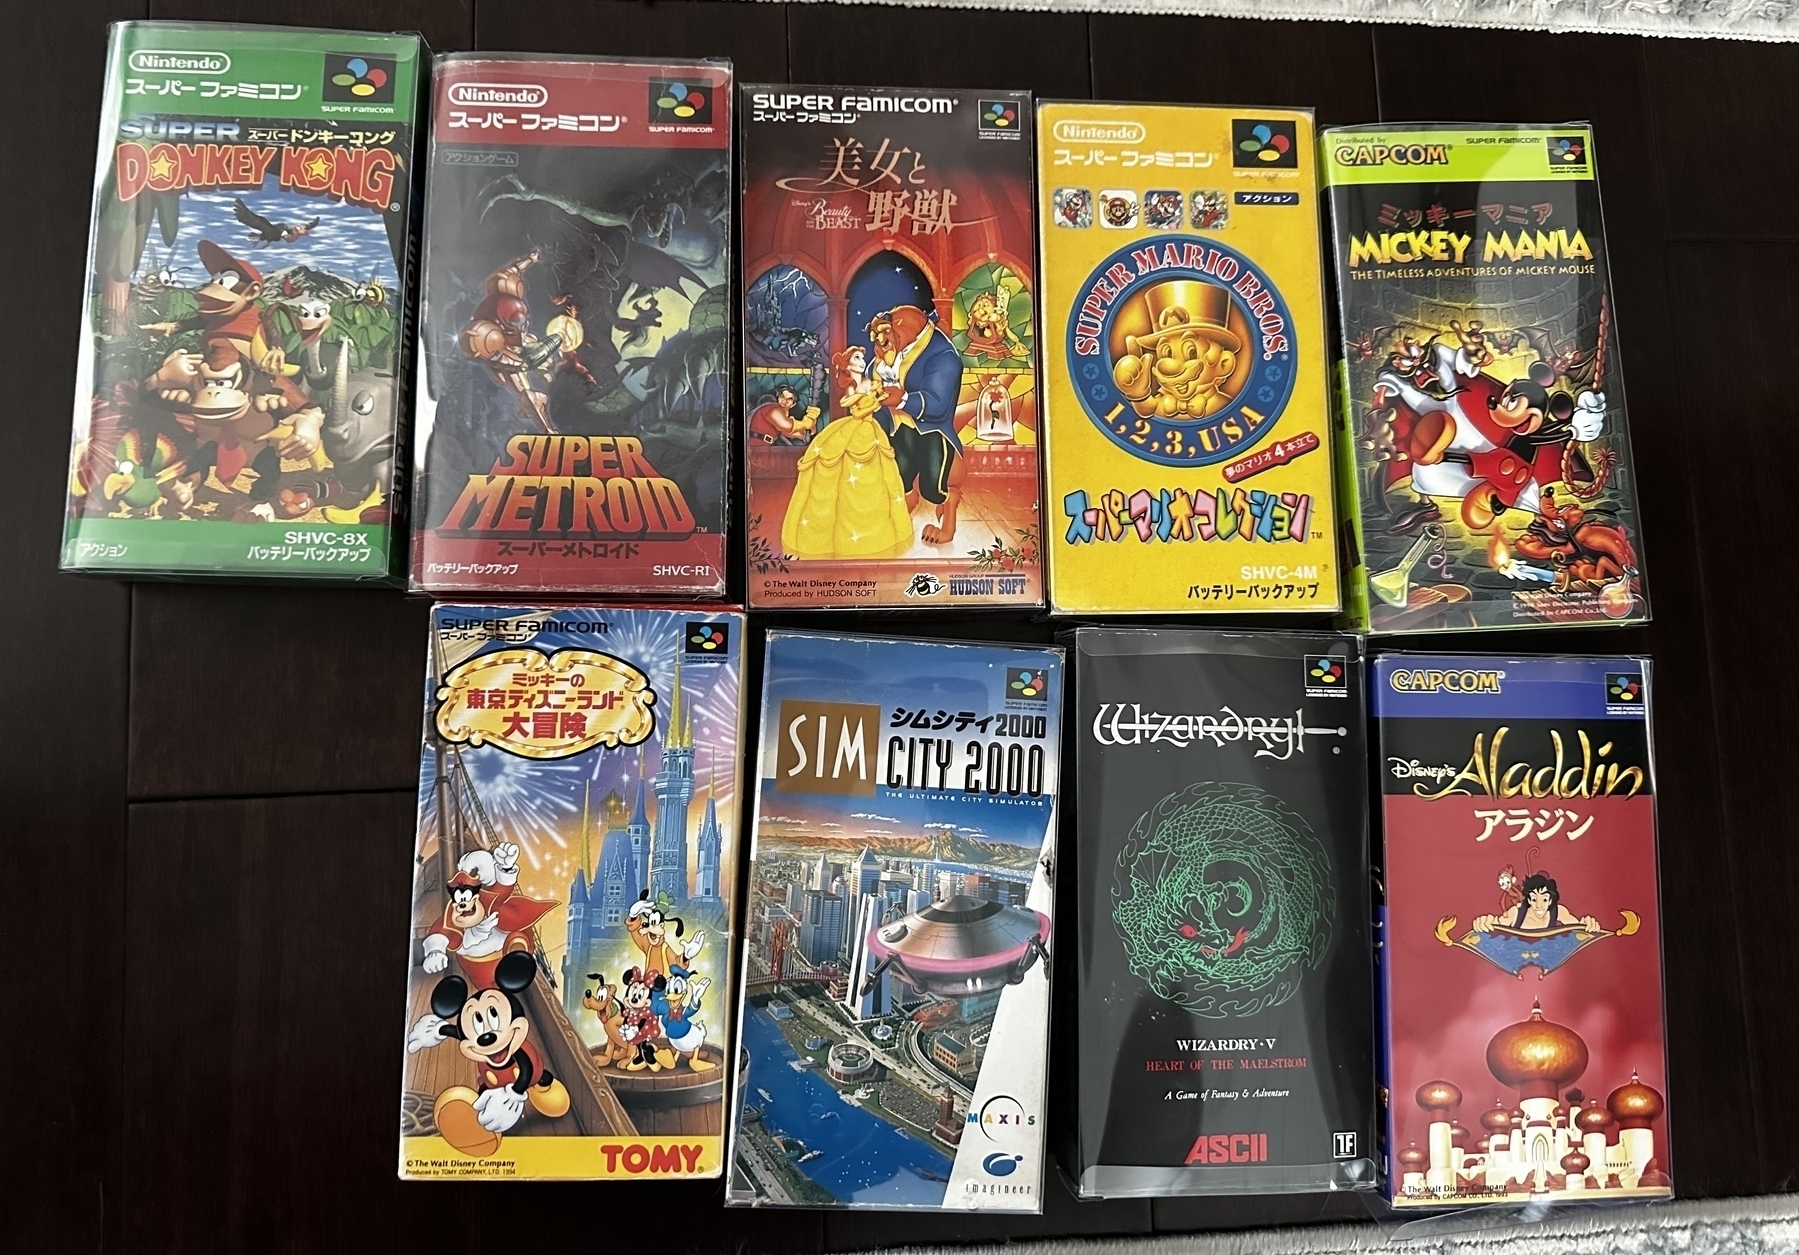 Super Famicom games in their boxes 